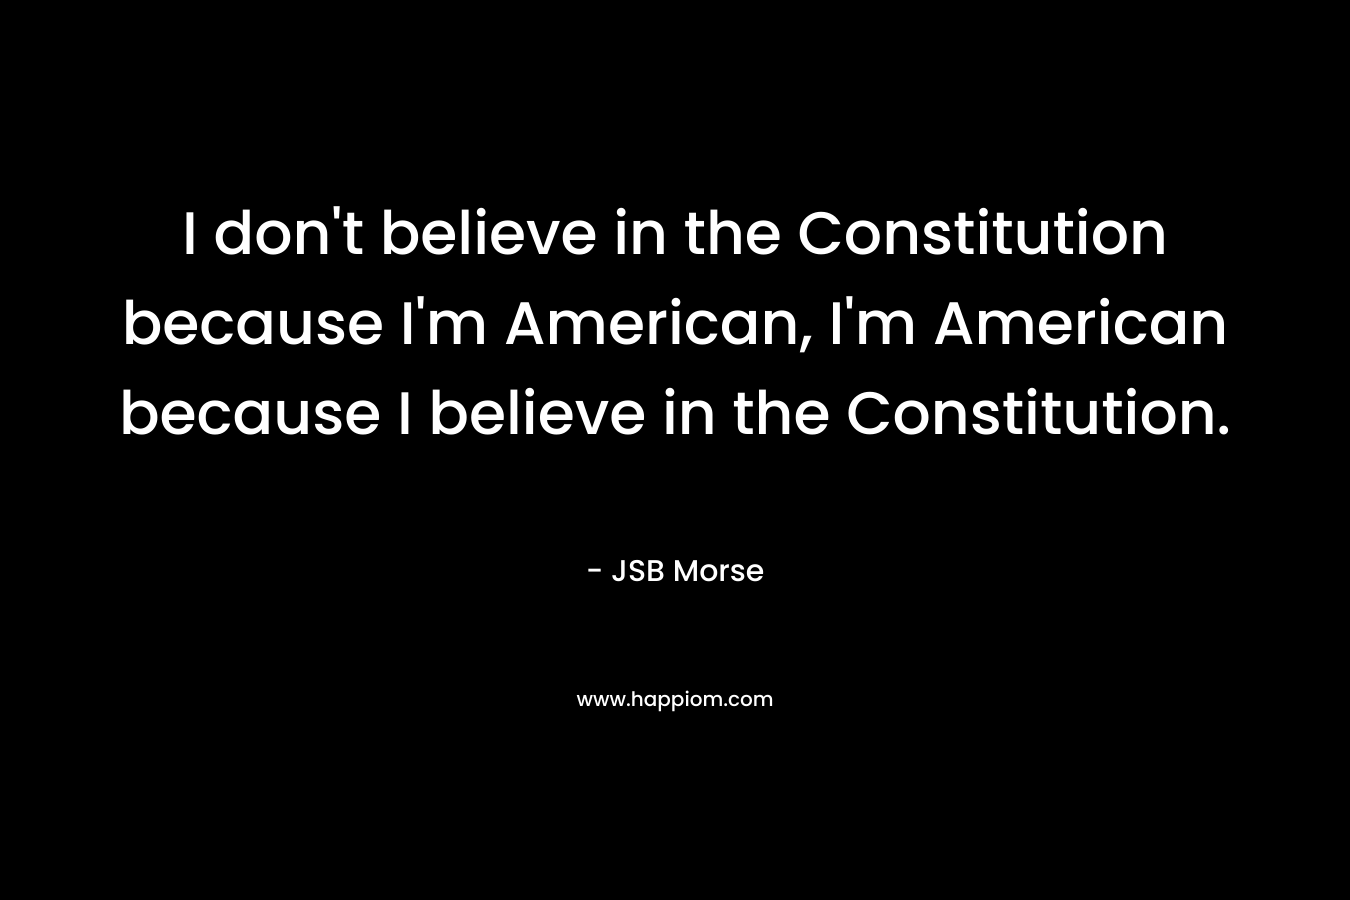 I don’t believe in the Constitution because I’m American, I’m American because I believe in the Constitution. – JSB Morse